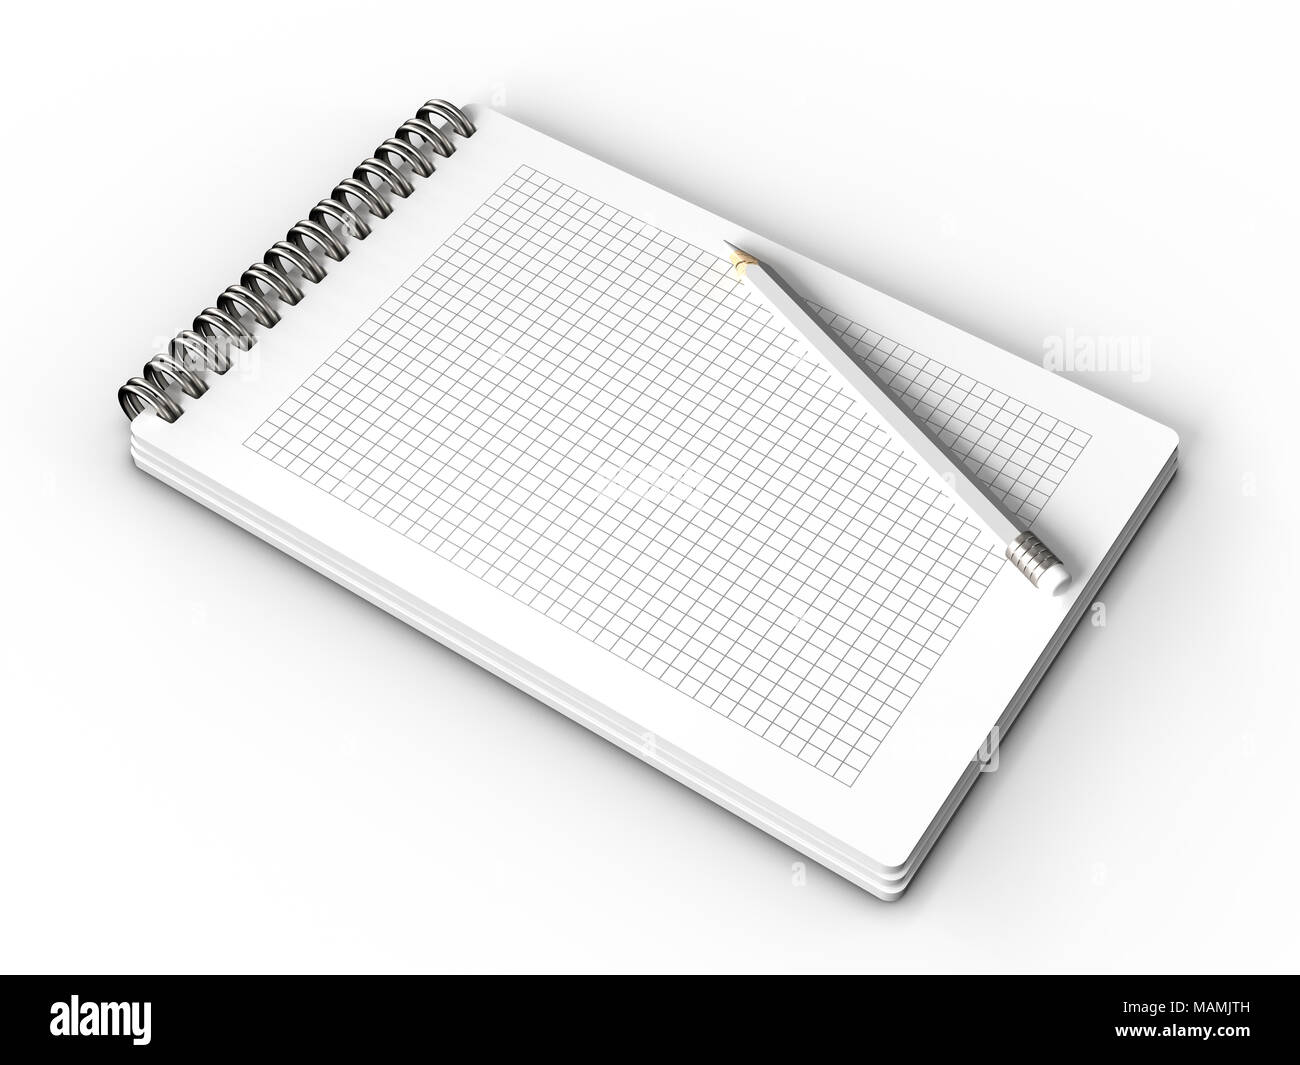 3d illustration of notepad with pencil Stock Photo